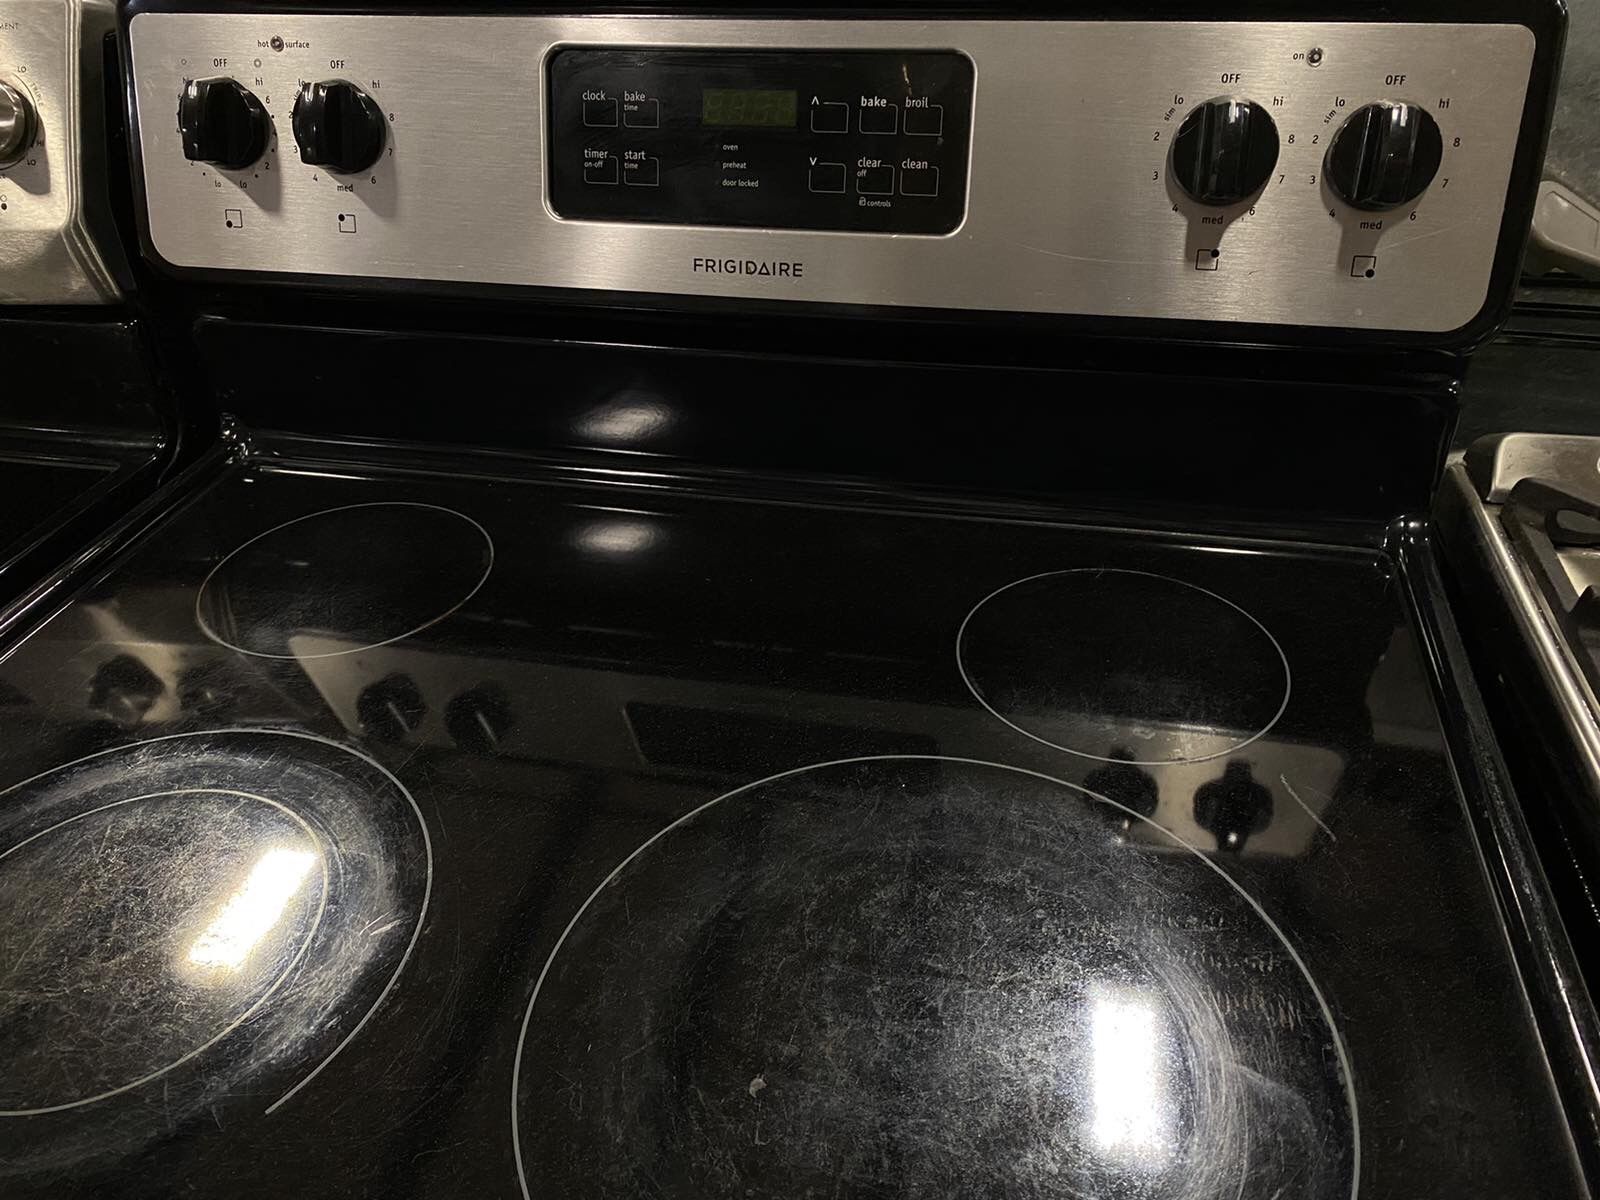 40” Frigidaire Electric Range for Sale in Vancouver, WA - OfferUp